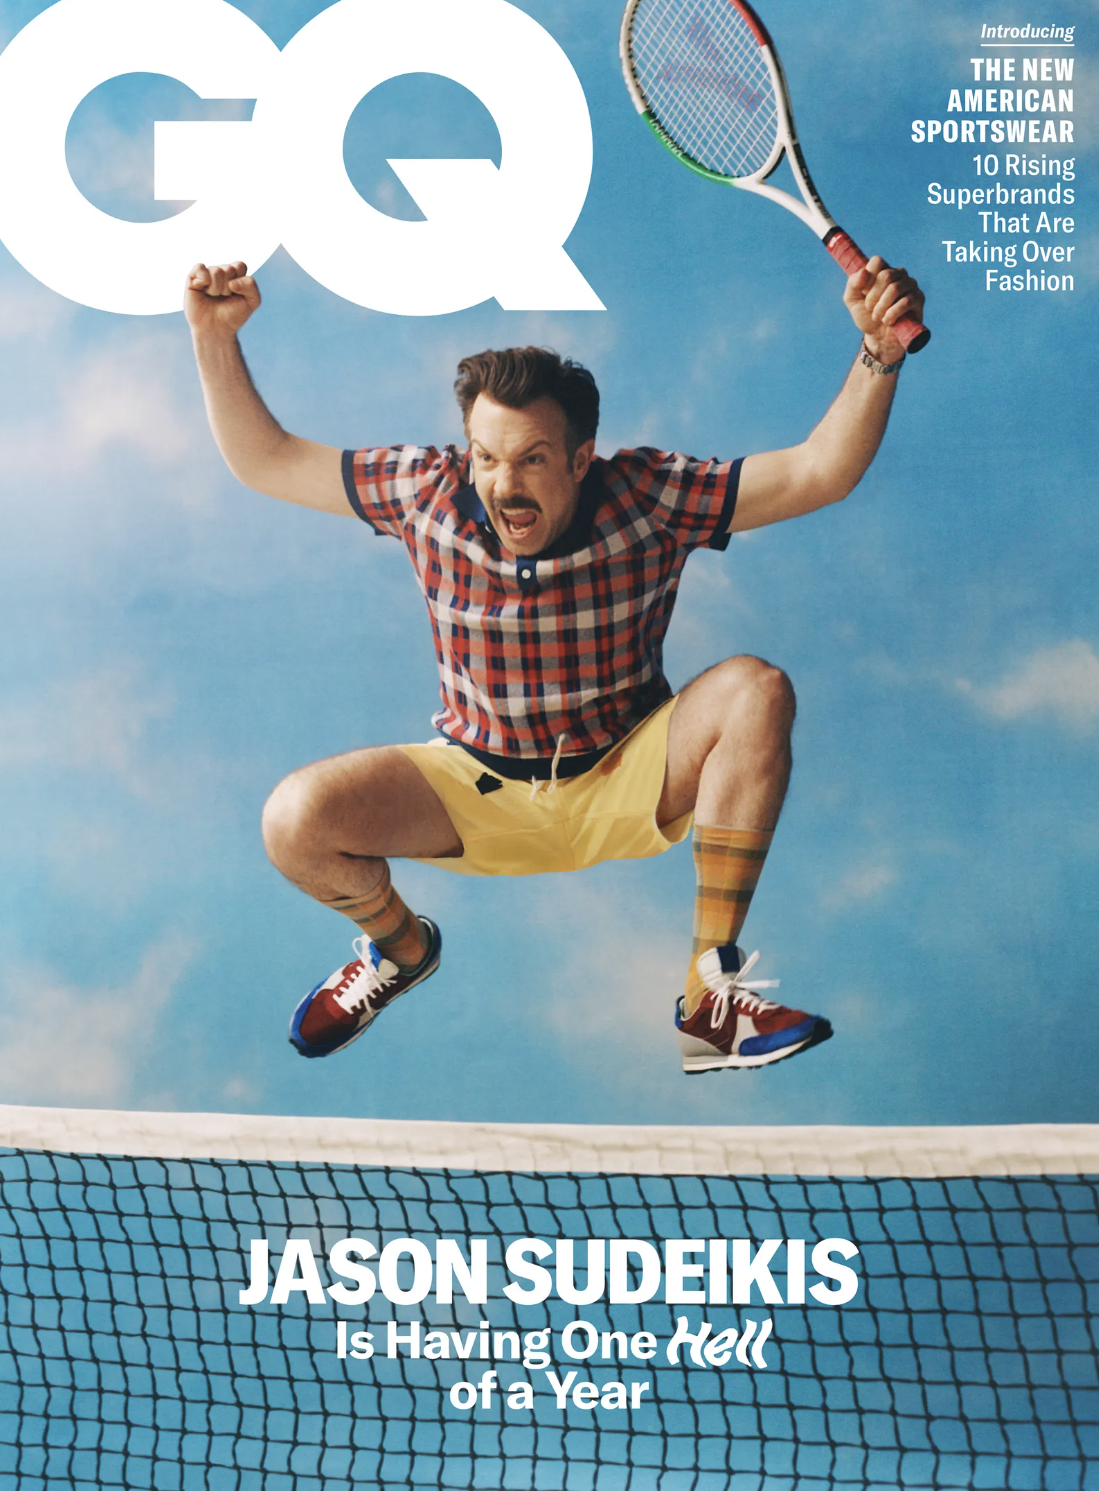 jason sudeikis shorts - Cq Intresting The New American Sportswear 10 Rising Superbrands That Are Taking Over Fashion Jason Sudeikis Is Having One Hell of a Year